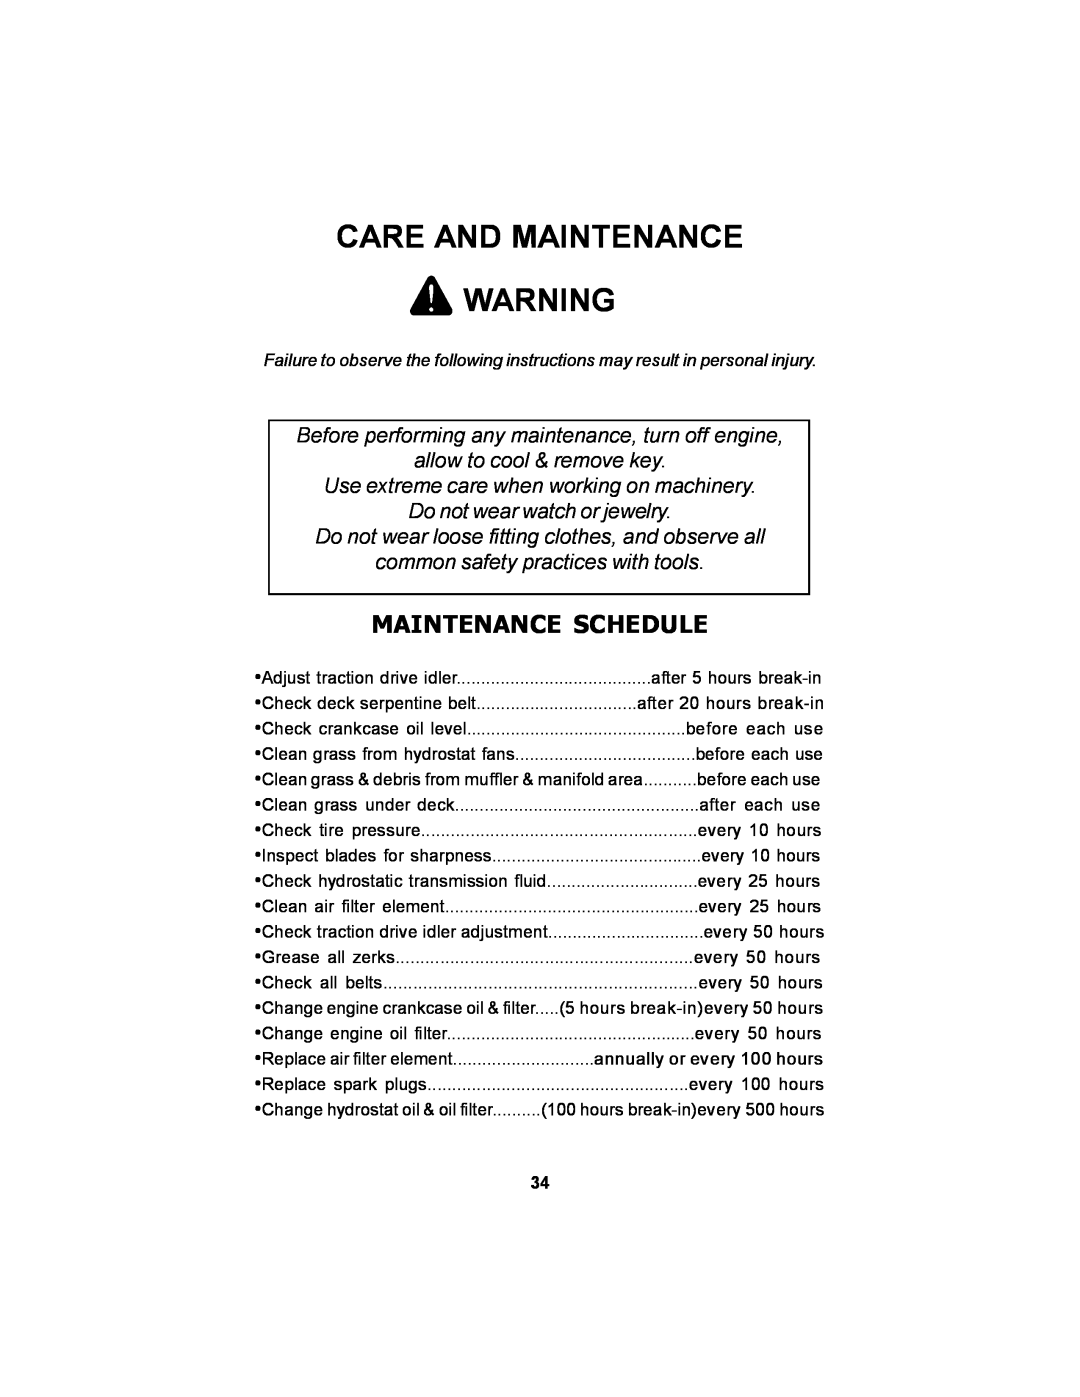 Dixon 11249-106 manual Care And Maintenance, Maintenance Schedule, allow to cool & remove key, Do not wear watch or jewelry 